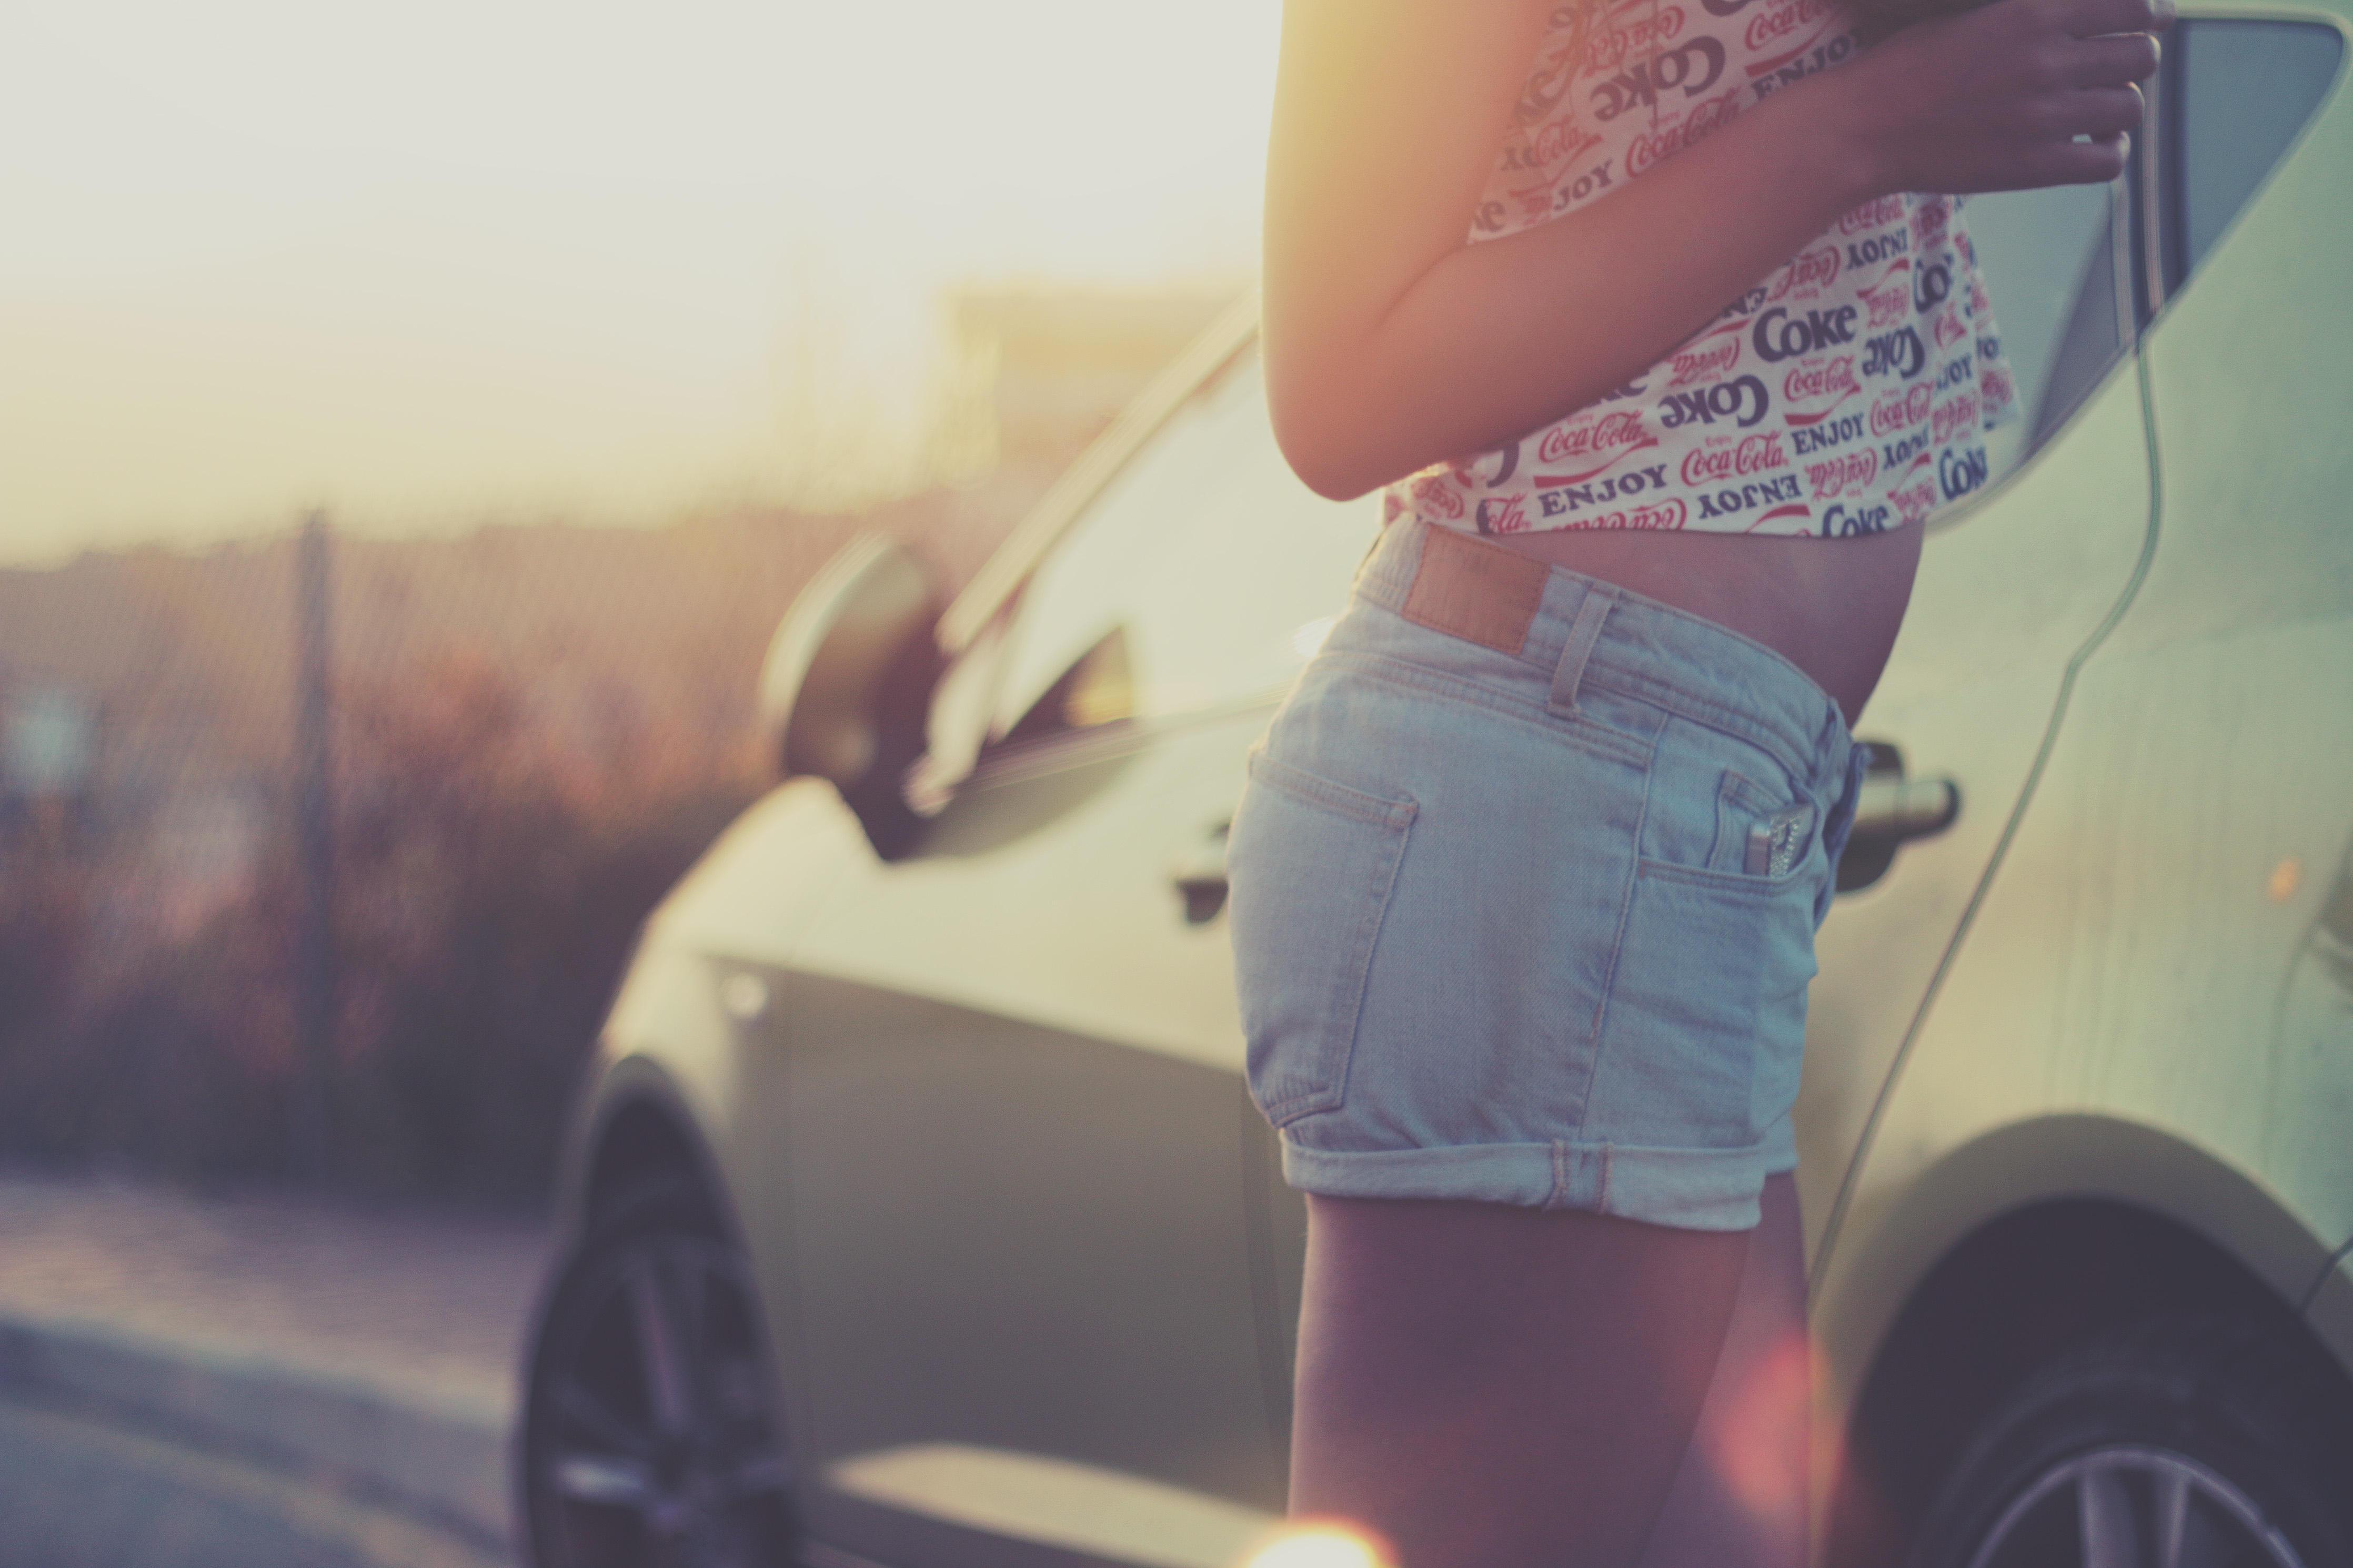 Female in coke shirt and jean shorts by car photo